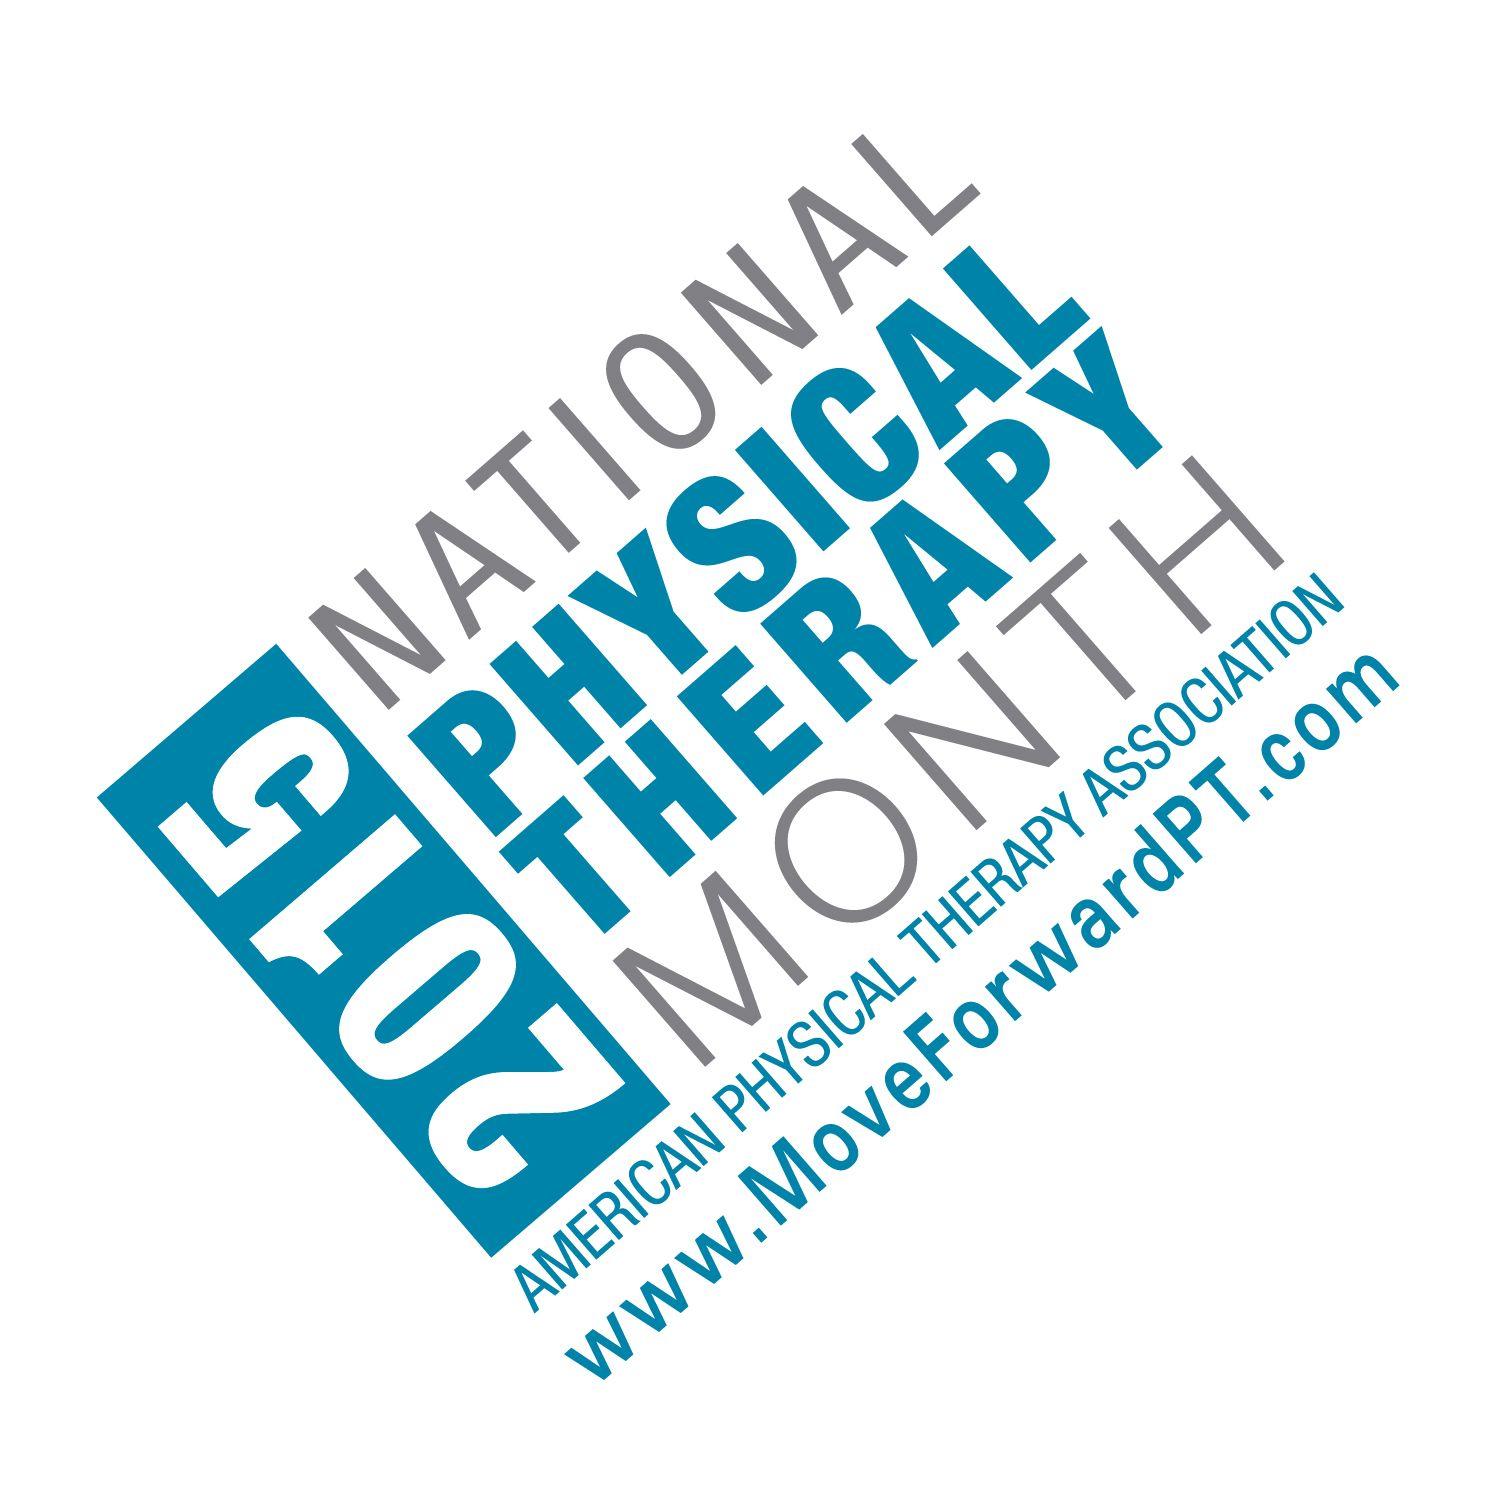 National Physical Therapy Month Logo - Celebrating National Physical Therapy Month #AgeWell - Infinity Rehab